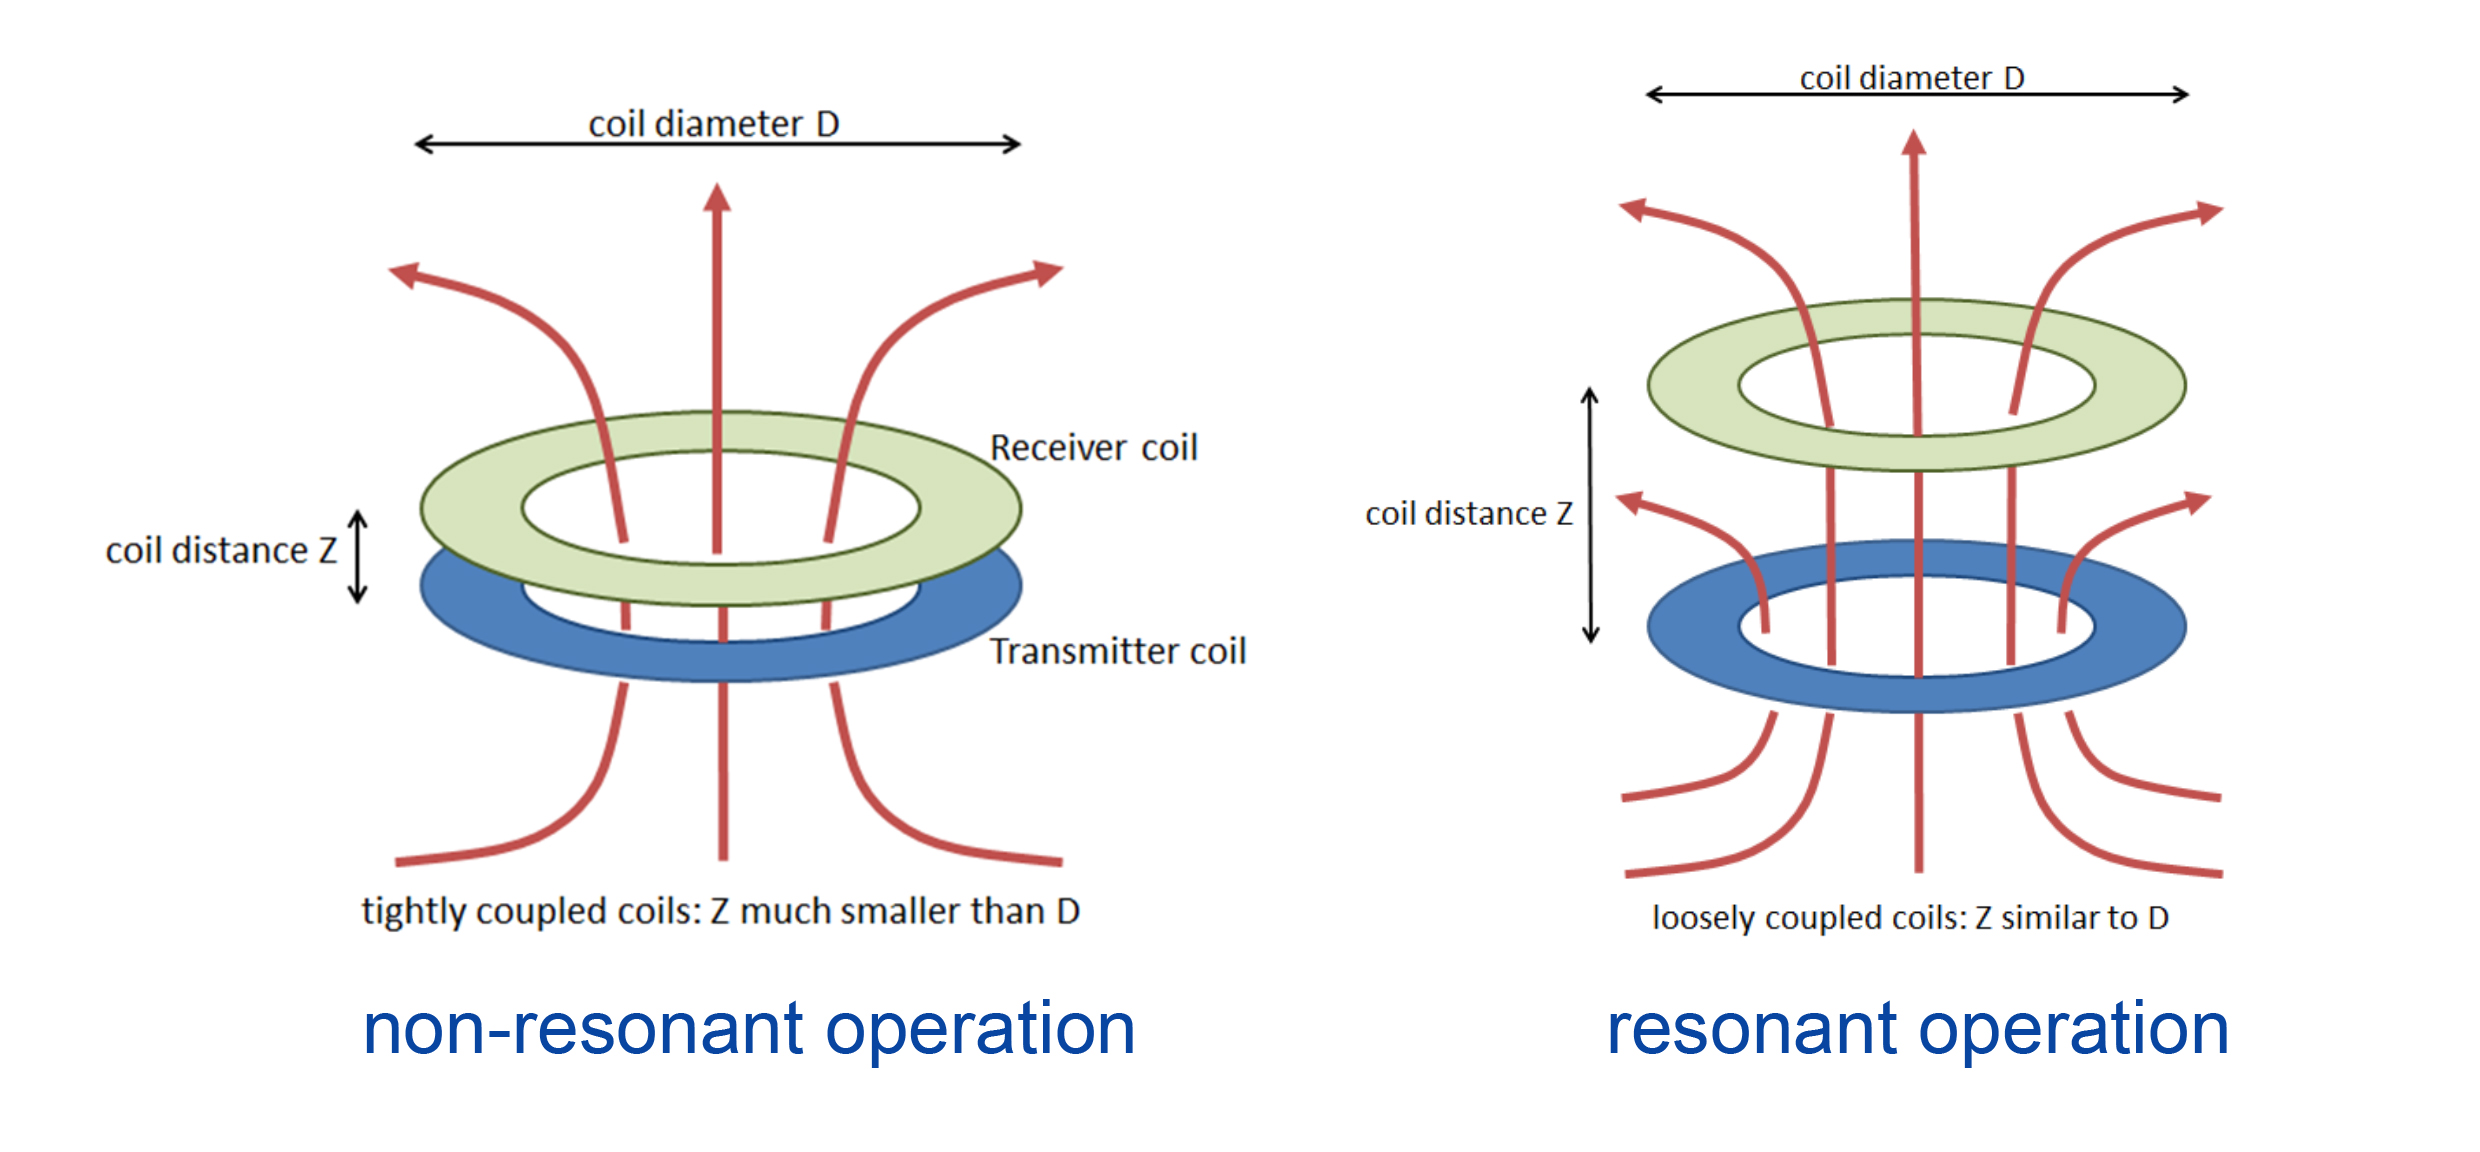 Figure 2 - The difference between resonant and non-resonant operation